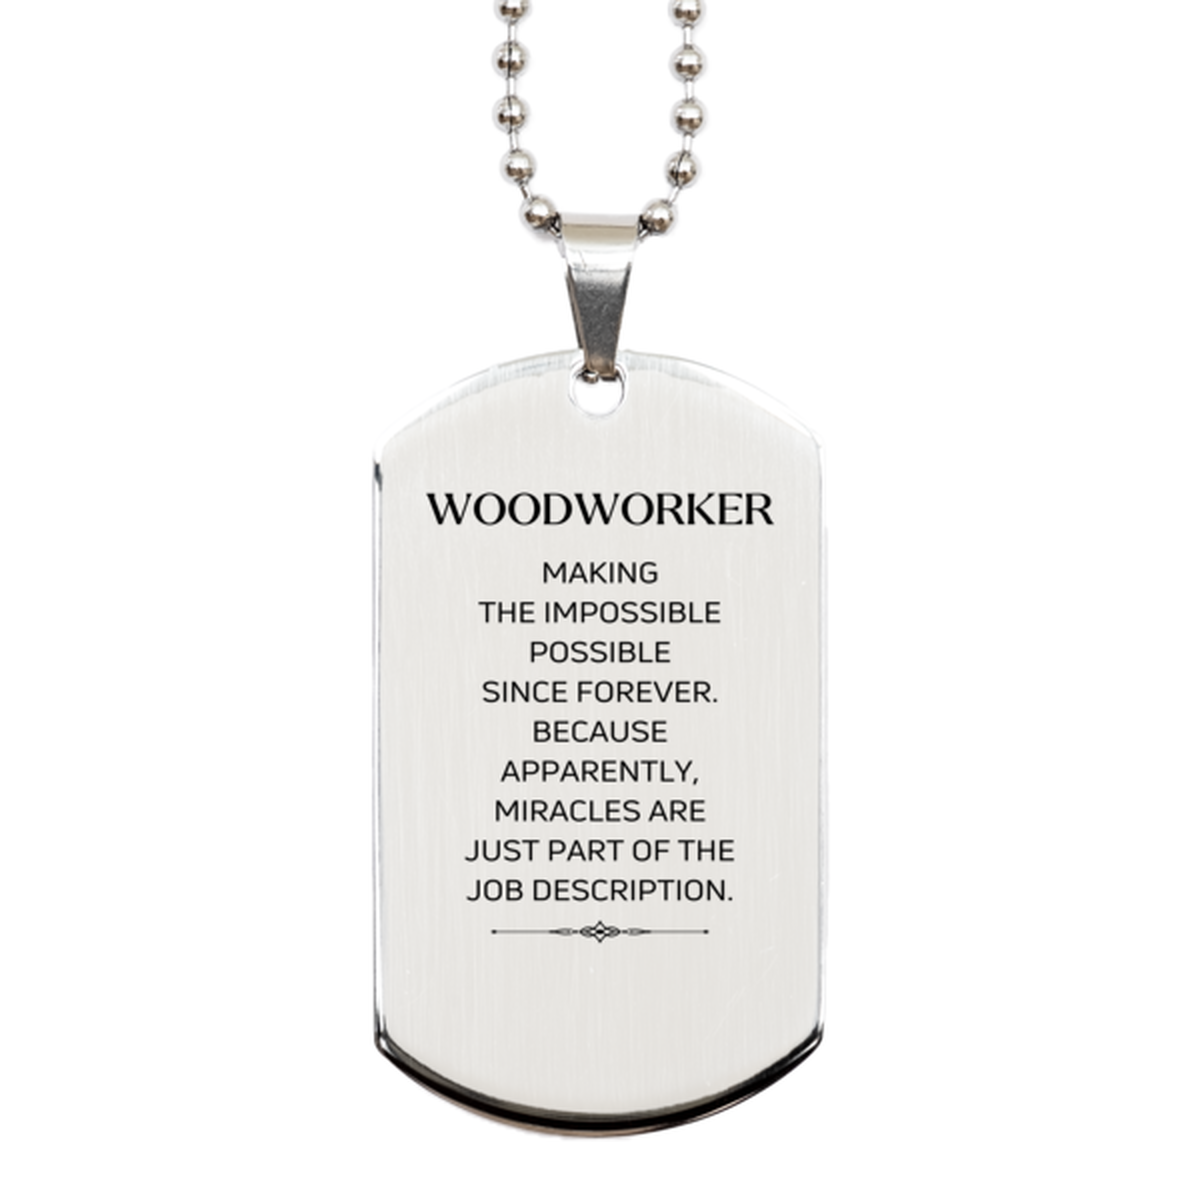 Funny Woodworker Gifts, Miracles are just part of the job description, Inspirational Birthday Silver Dog Tag For Woodworker, Men, Women, Coworkers, Friends, Boss